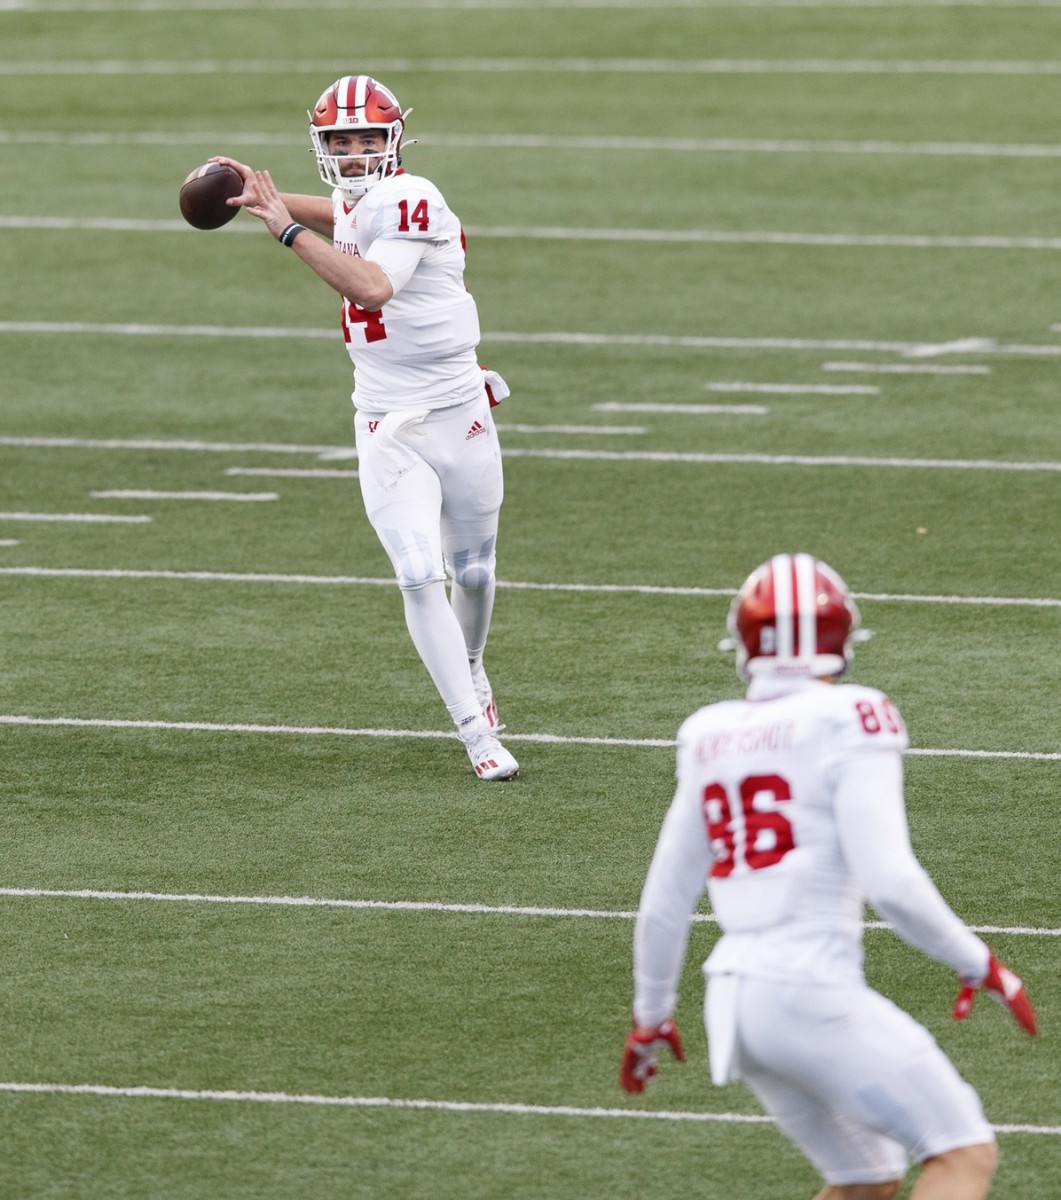 Indiana quarterback Jack Tuttle (14) throws a pass to tight end Peyton Hendershot (86) against  Wisconsin. (Jeff Hanisch-USA TODAY Sports)